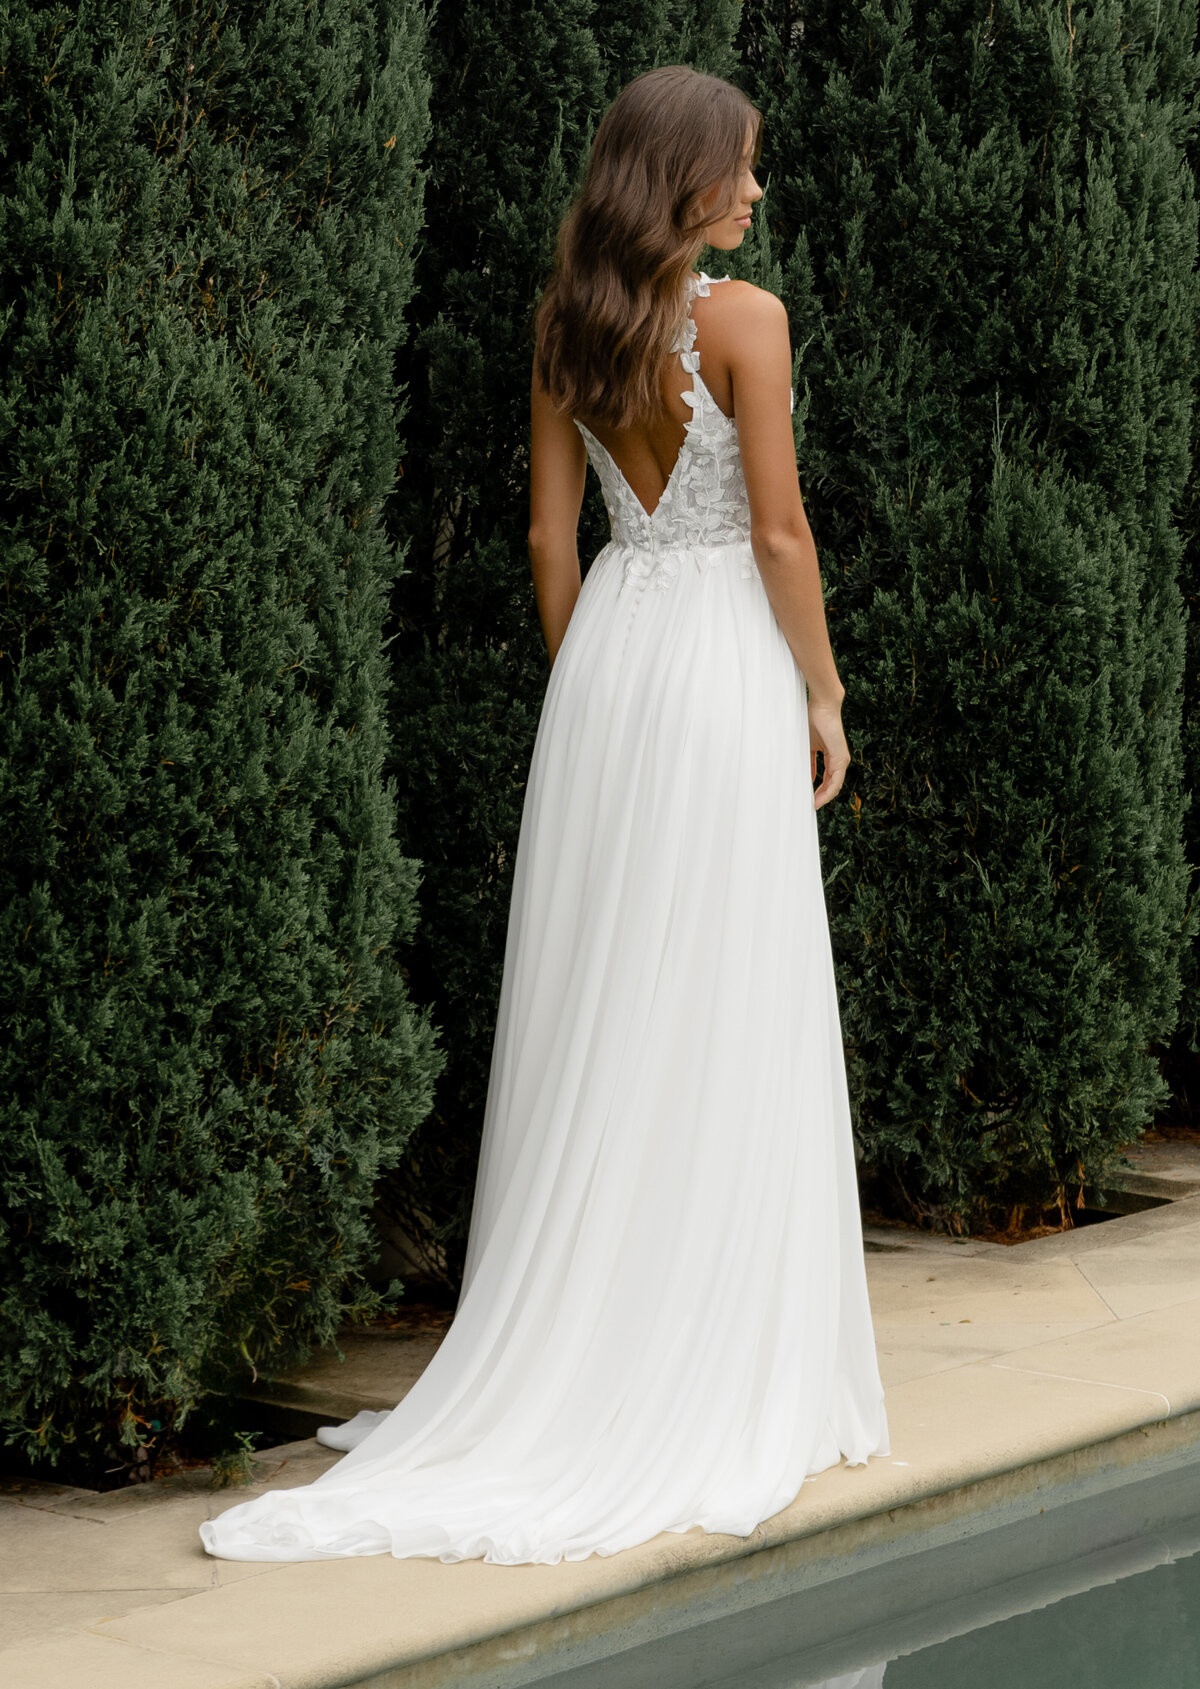 Back of wedding dress by the pool